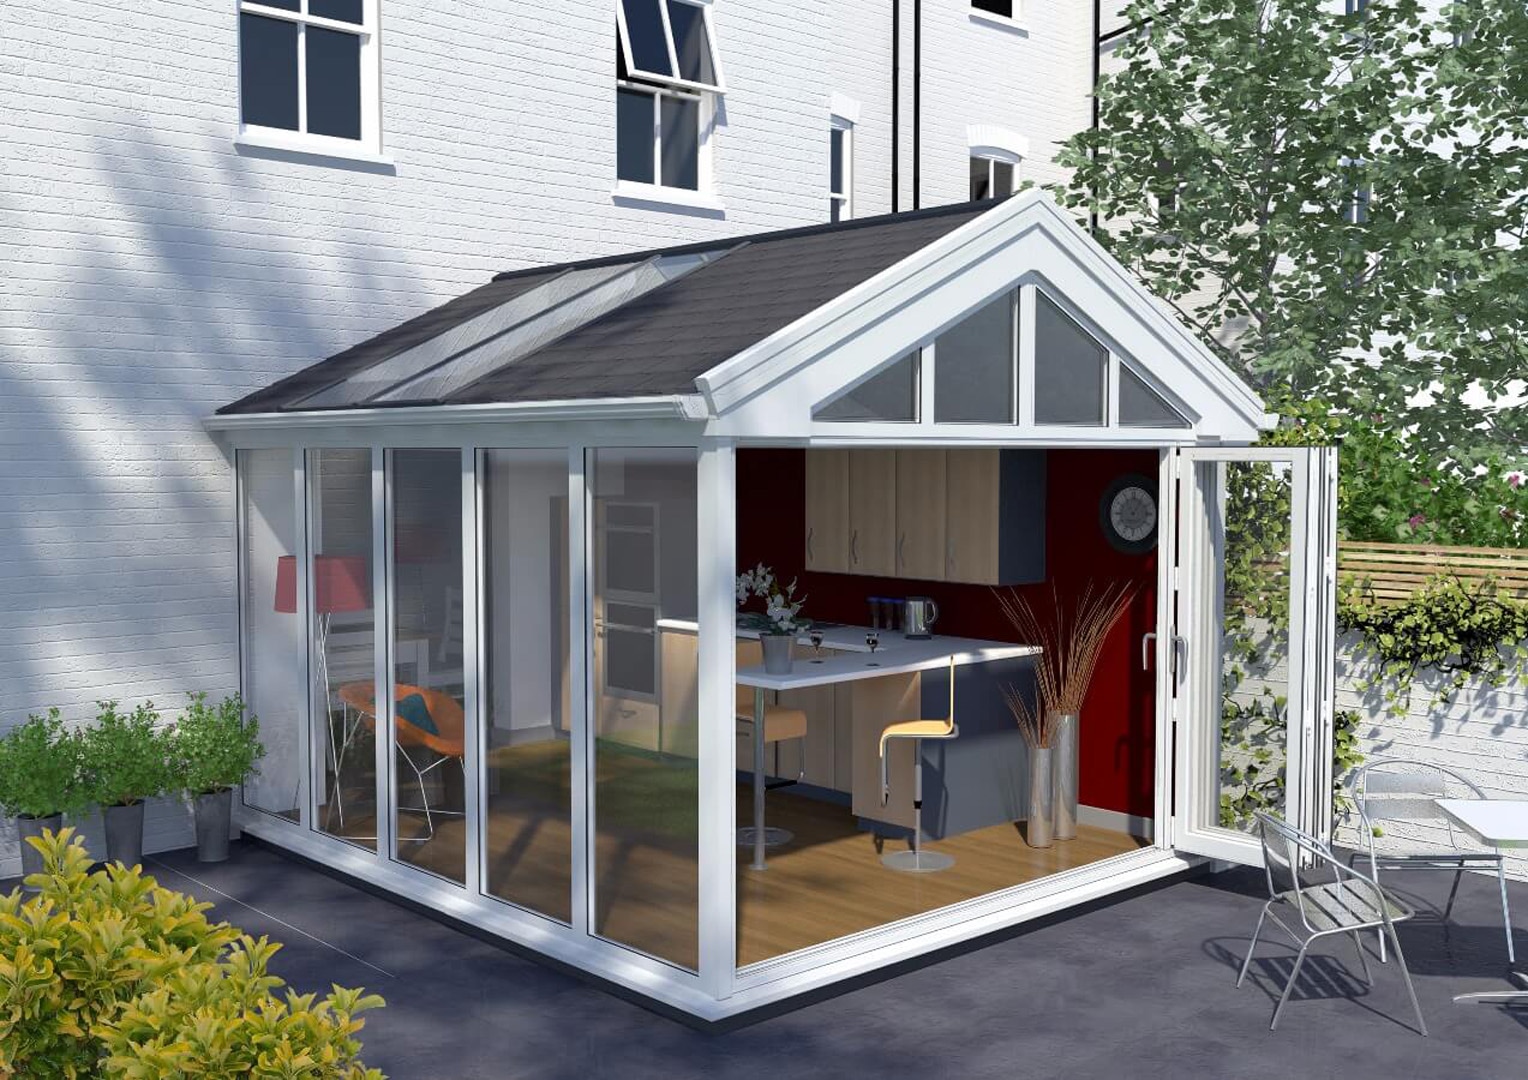 Exterior view of a gable-end conservatory with a distinctive triangular front, large windows, and a robust structure, showcasing a classic design that elegantly complements the adjoining house.